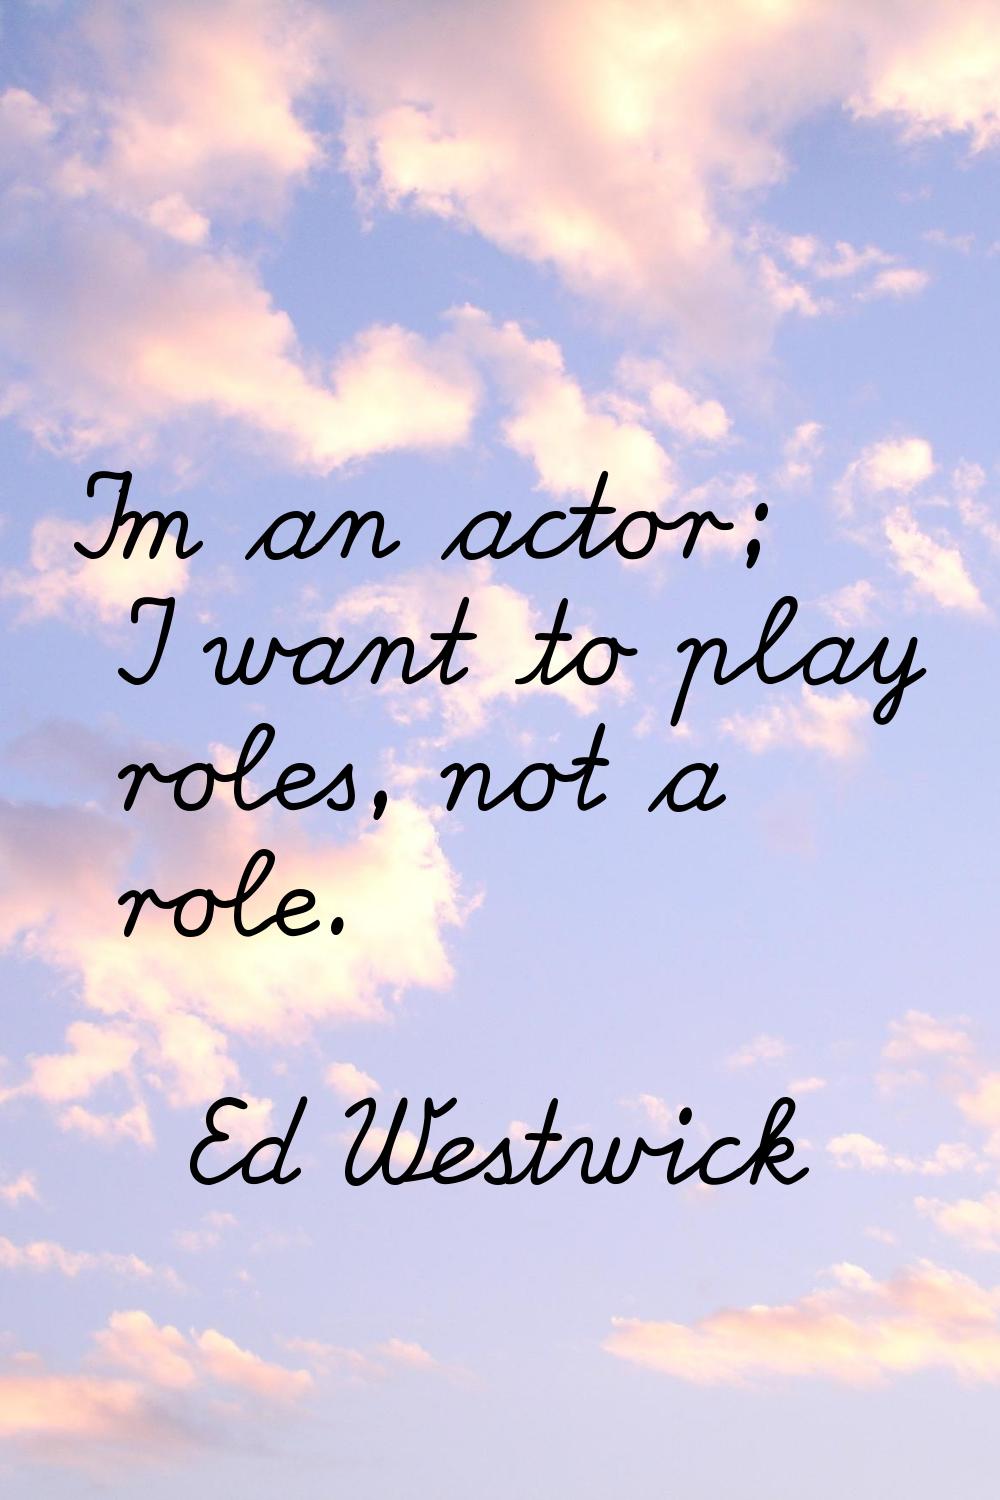 I'm an actor; I want to play roles, not a role.